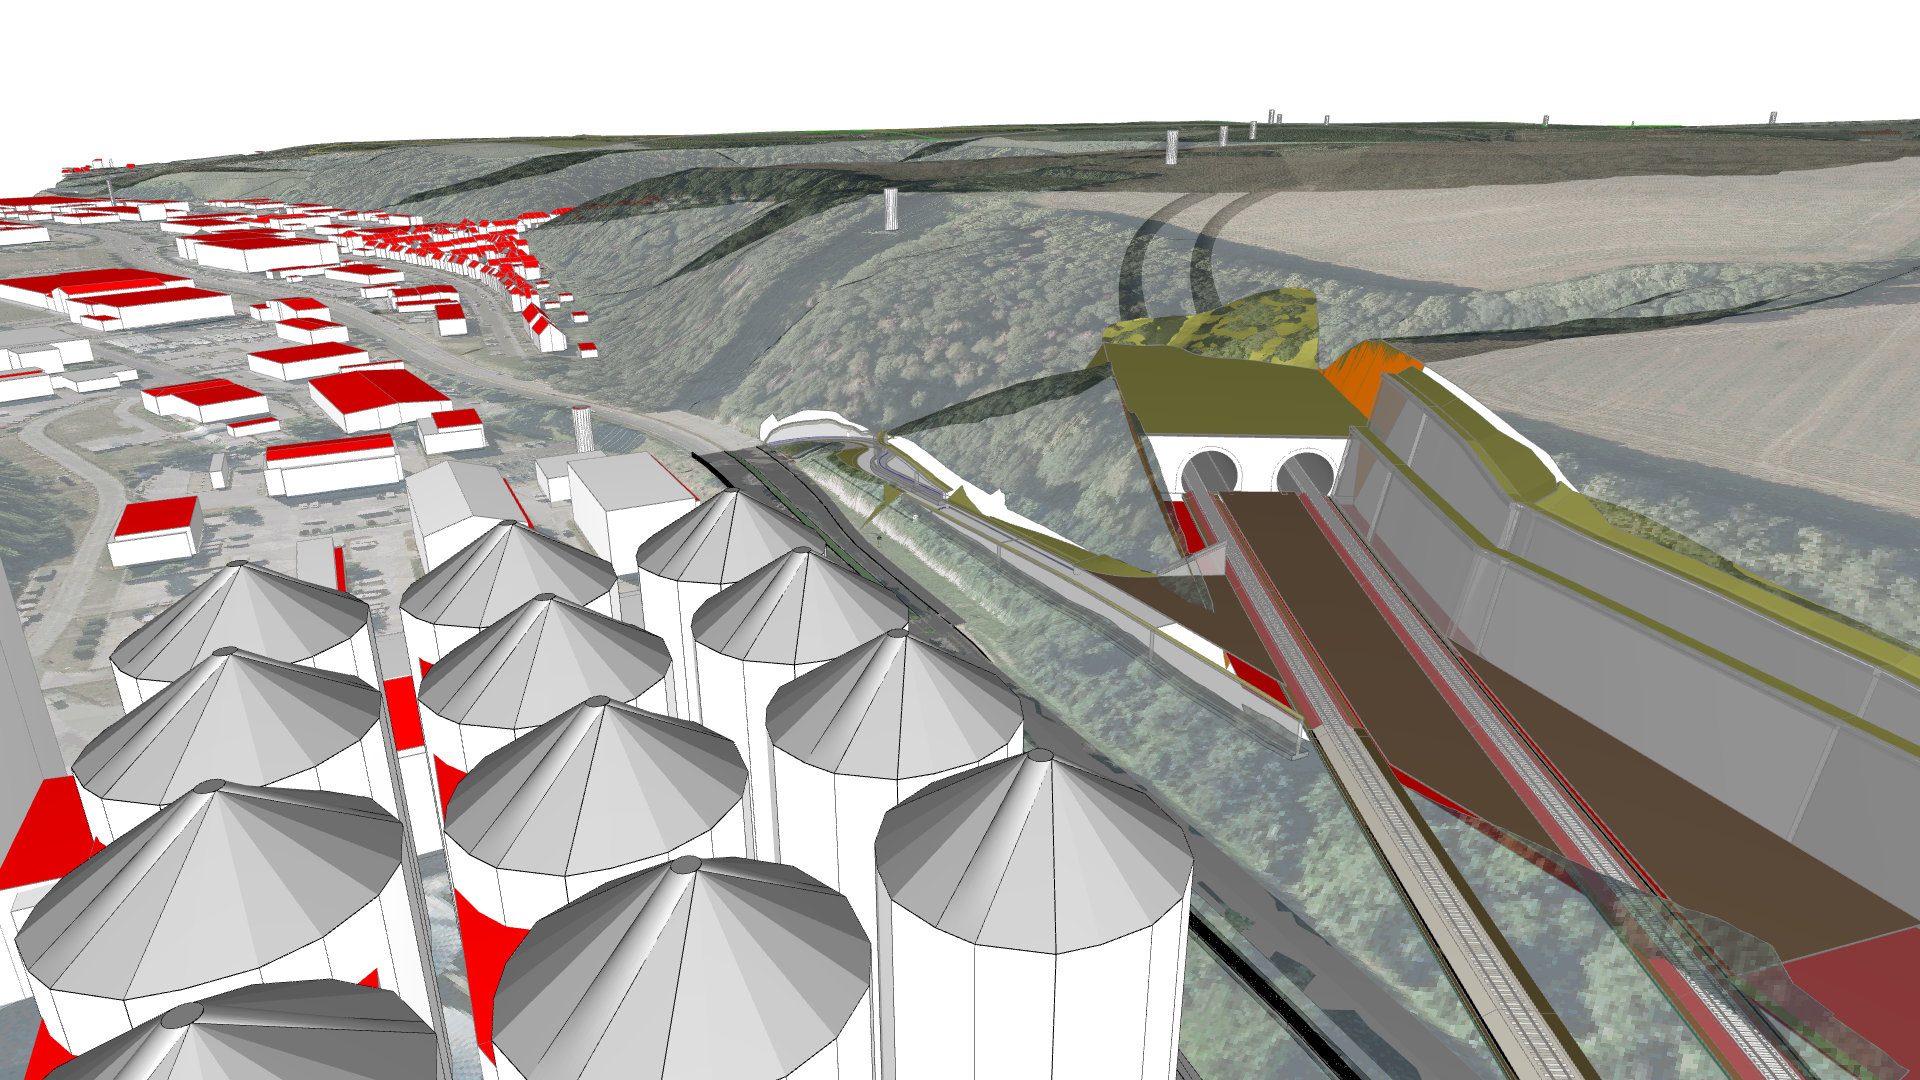 Illustrating Building Information Modelling (BIM) for the new Dresden-Prague line, this image showcases the integration of a tunnel with an AGRO-terminal.